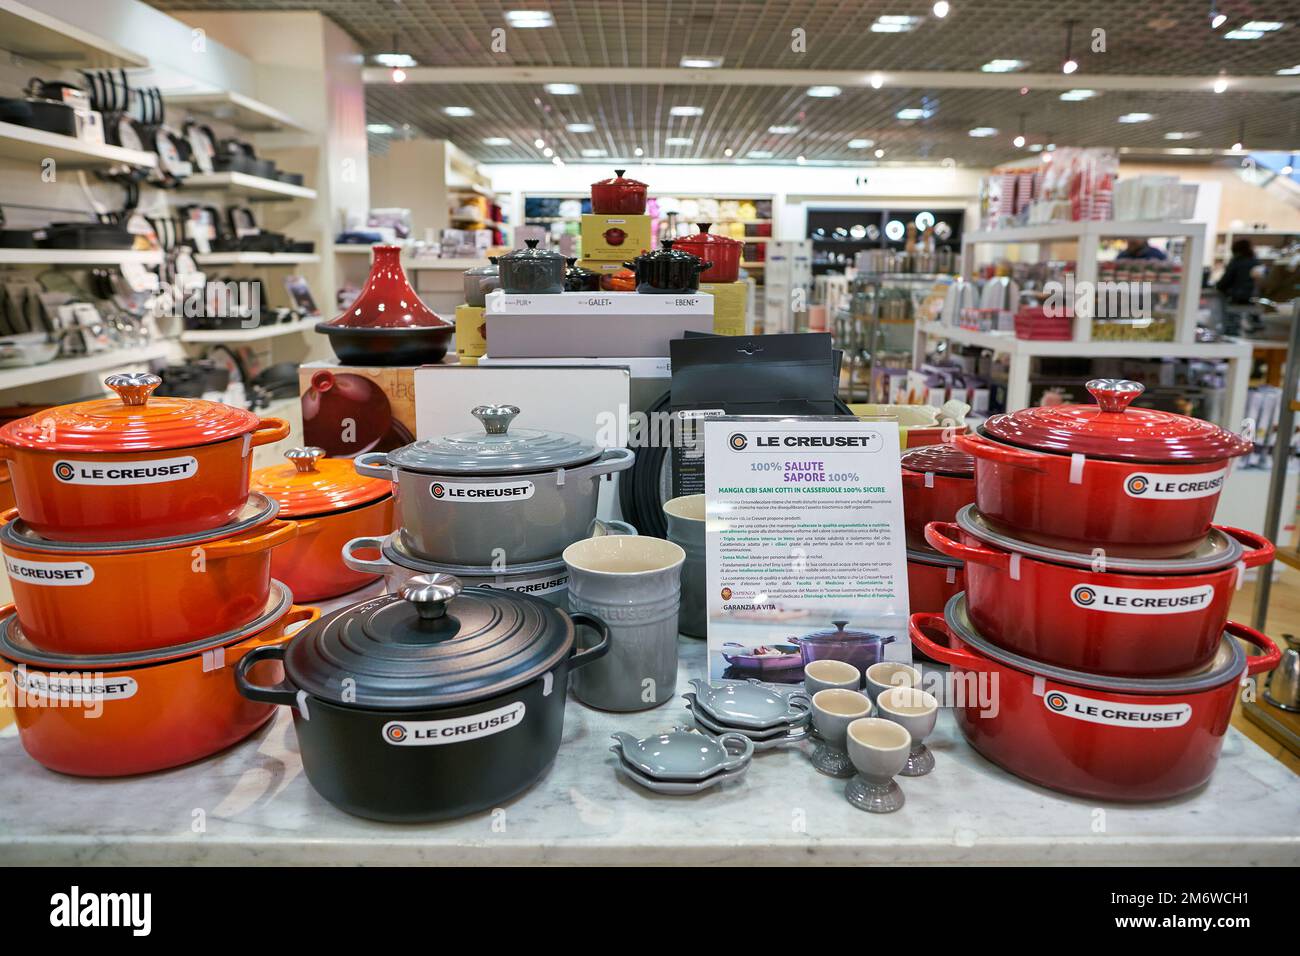 https://c8.alamy.com/comp/2M6WCH1/rome-italy-circa-november-2017-le-creuset-cookware-displayed-at-rinascente-store-in-rome-2M6WCH1.jpg